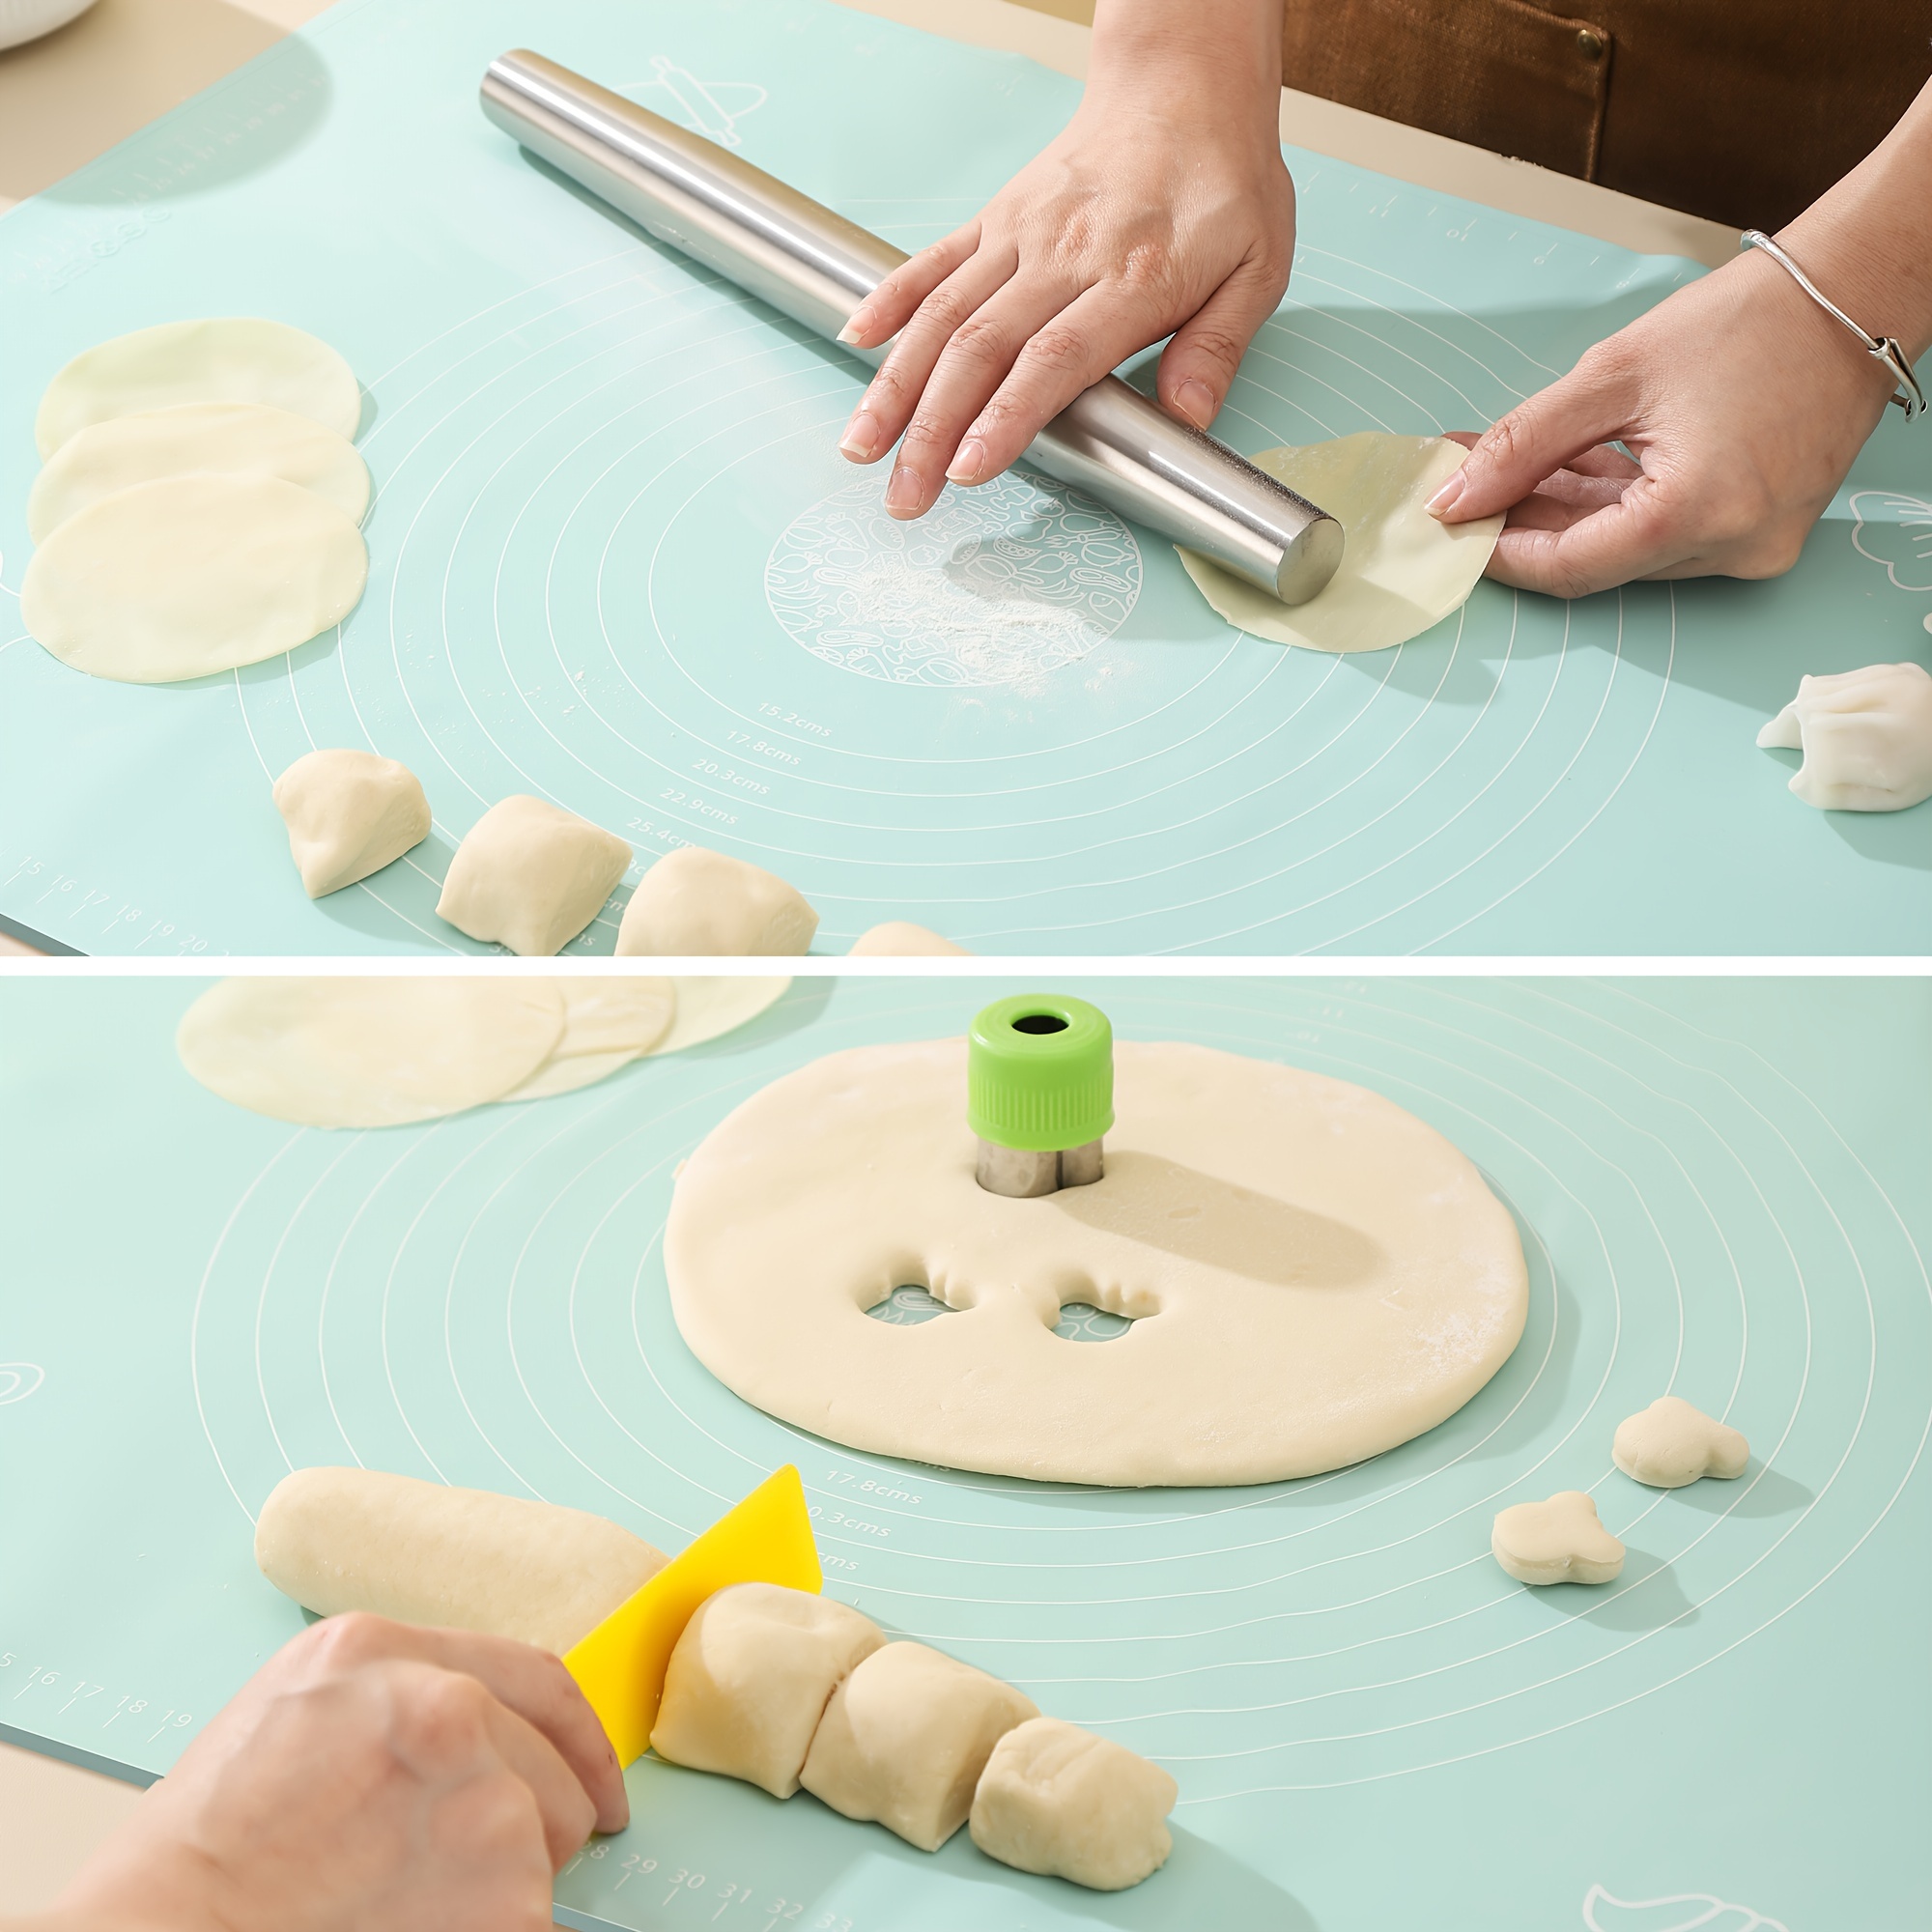 Kitchen Silicone Pad,Large Non Slip Non Stick Silicone Pastry Mats Baking  Mat for Rolling Out Dough for Home Kitchen Bread Shop